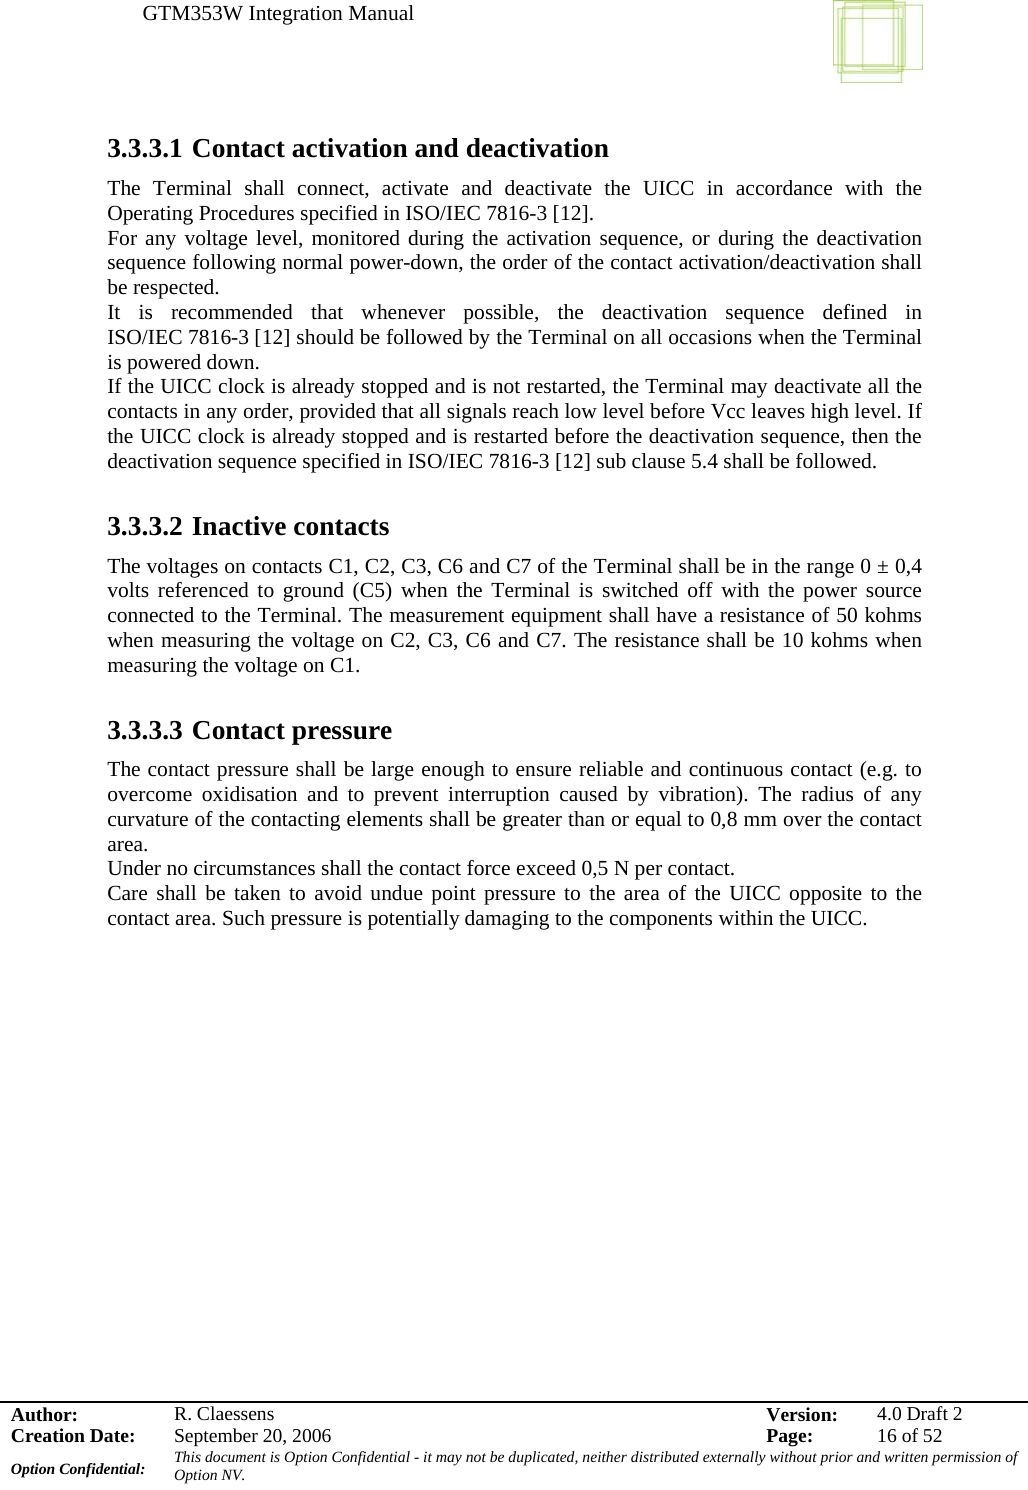 GTM353W Integration Manual      Author: R. Claessens  Version:  4.0 Draft 2Creation Date:  September 20, 2006  Page:  16 of 52 Option Confidential:  This document is Option Confidential - it may not be duplicated, neither distributed externally without prior and written permission of Option NV.    3.3.3.1 Contact activation and deactivation The Terminal shall connect, activate and deactivate the UICC in accordance with the Operating Procedures specified in ISO/IEC 7816-3 [12]. For any voltage level, monitored during the activation sequence, or during the deactivation sequence following normal power-down, the order of the contact activation/deactivation shall be respected. It is recommended that whenever possible, the deactivation sequence defined in ISO/IEC 7816-3 [12] should be followed by the Terminal on all occasions when the Terminal is powered down. If the UICC clock is already stopped and is not restarted, the Terminal may deactivate all the contacts in any order, provided that all signals reach low level before Vcc leaves high level. If the UICC clock is already stopped and is restarted before the deactivation sequence, then the deactivation sequence specified in ISO/IEC 7816-3 [12] sub clause 5.4 shall be followed.  3.3.3.2 Inactive contacts The voltages on contacts C1, C2, C3, C6 and C7 of the Terminal shall be in the range 0 ± 0,4 volts referenced to ground (C5) when the Terminal is switched off with the power source connected to the Terminal. The measurement equipment shall have a resistance of 50 kohms when measuring the voltage on C2, C3, C6 and C7. The resistance shall be 10 kohms when measuring the voltage on C1.  3.3.3.3 Contact pressure The contact pressure shall be large enough to ensure reliable and continuous contact (e.g. to overcome oxidisation and to prevent interruption caused by vibration). The radius of any curvature of the contacting elements shall be greater than or equal to 0,8 mm over the contact area. Under no circumstances shall the contact force exceed 0,5 N per contact. Care shall be taken to avoid undue point pressure to the area of the UICC opposite to the contact area. Such pressure is potentially damaging to the components within the UICC.  